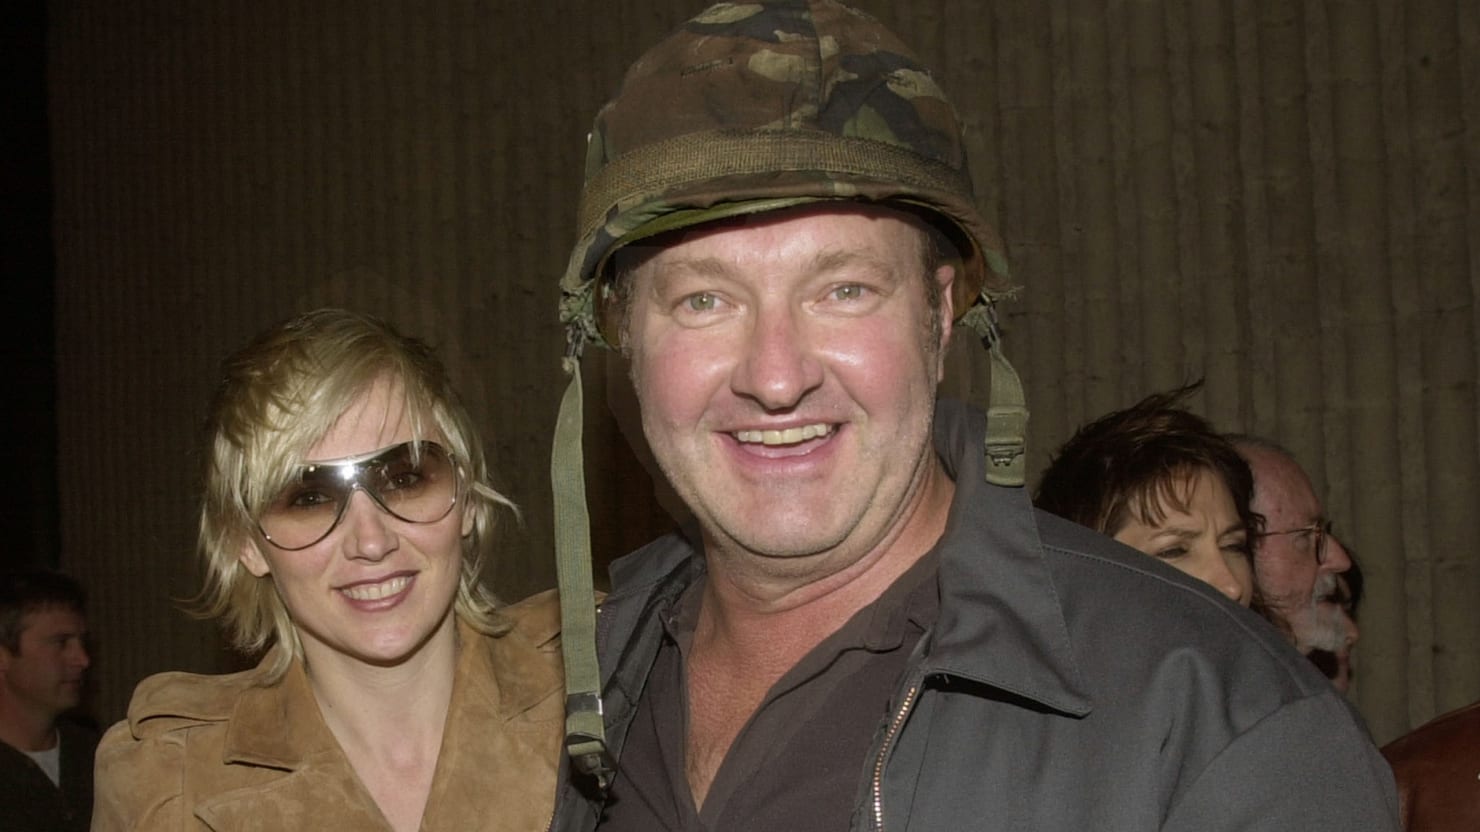 Randy Quaid Is Loony Tunes: Actor Rips Rupert Murdoch and Hollywood In Biza...